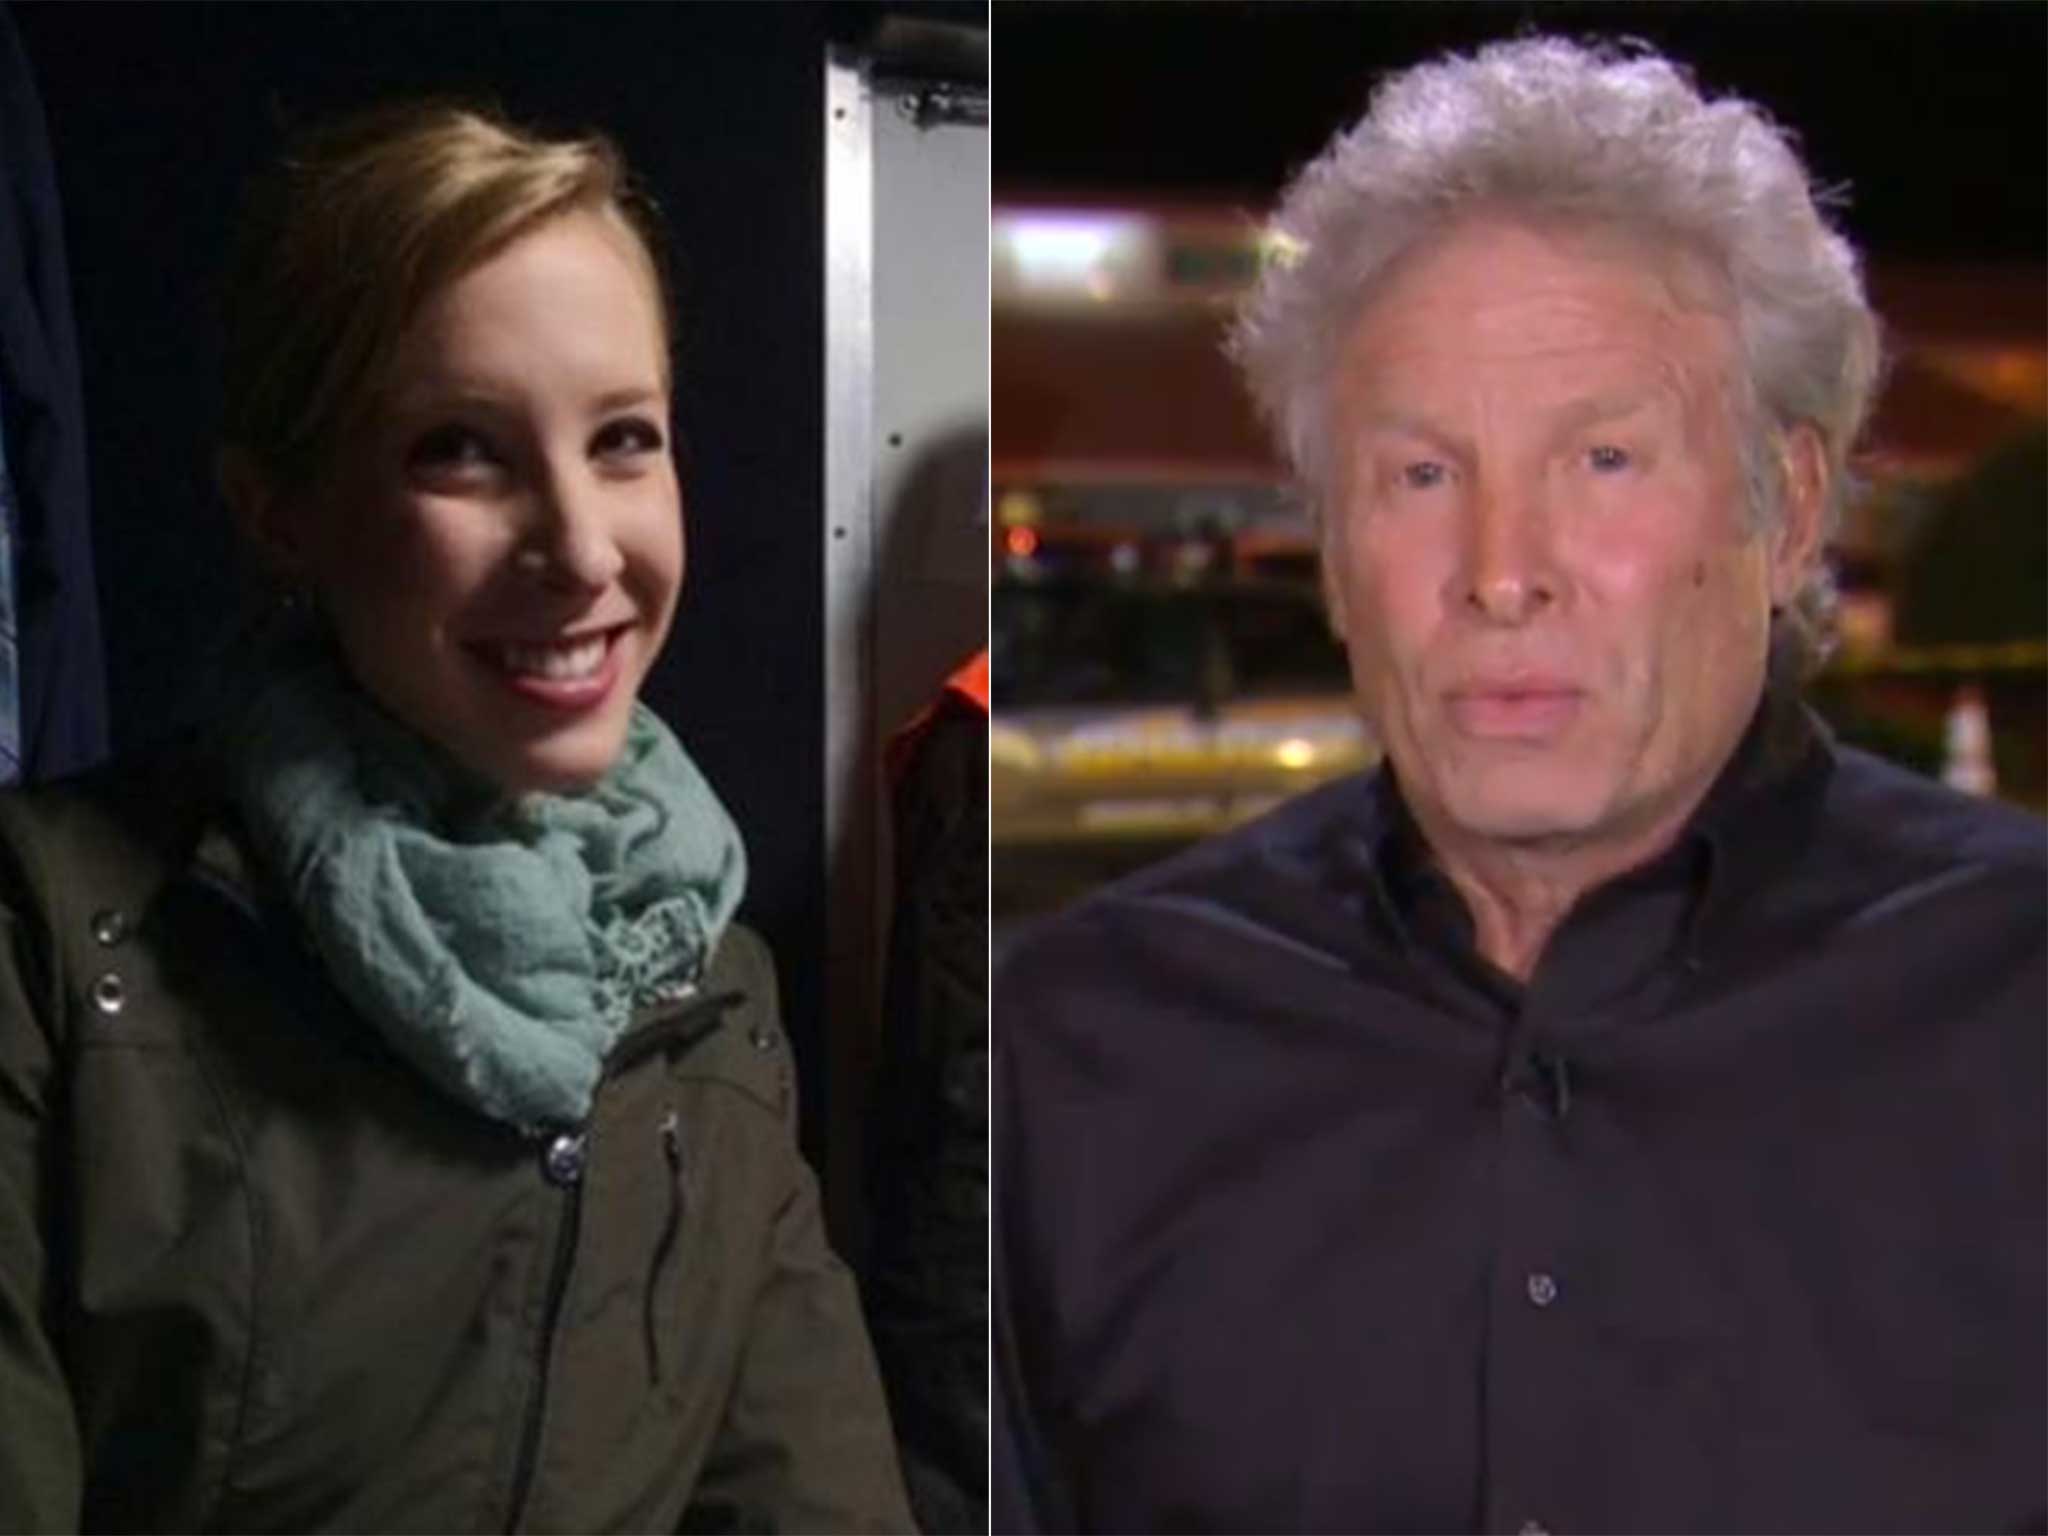 Alison Parker and her father Andy